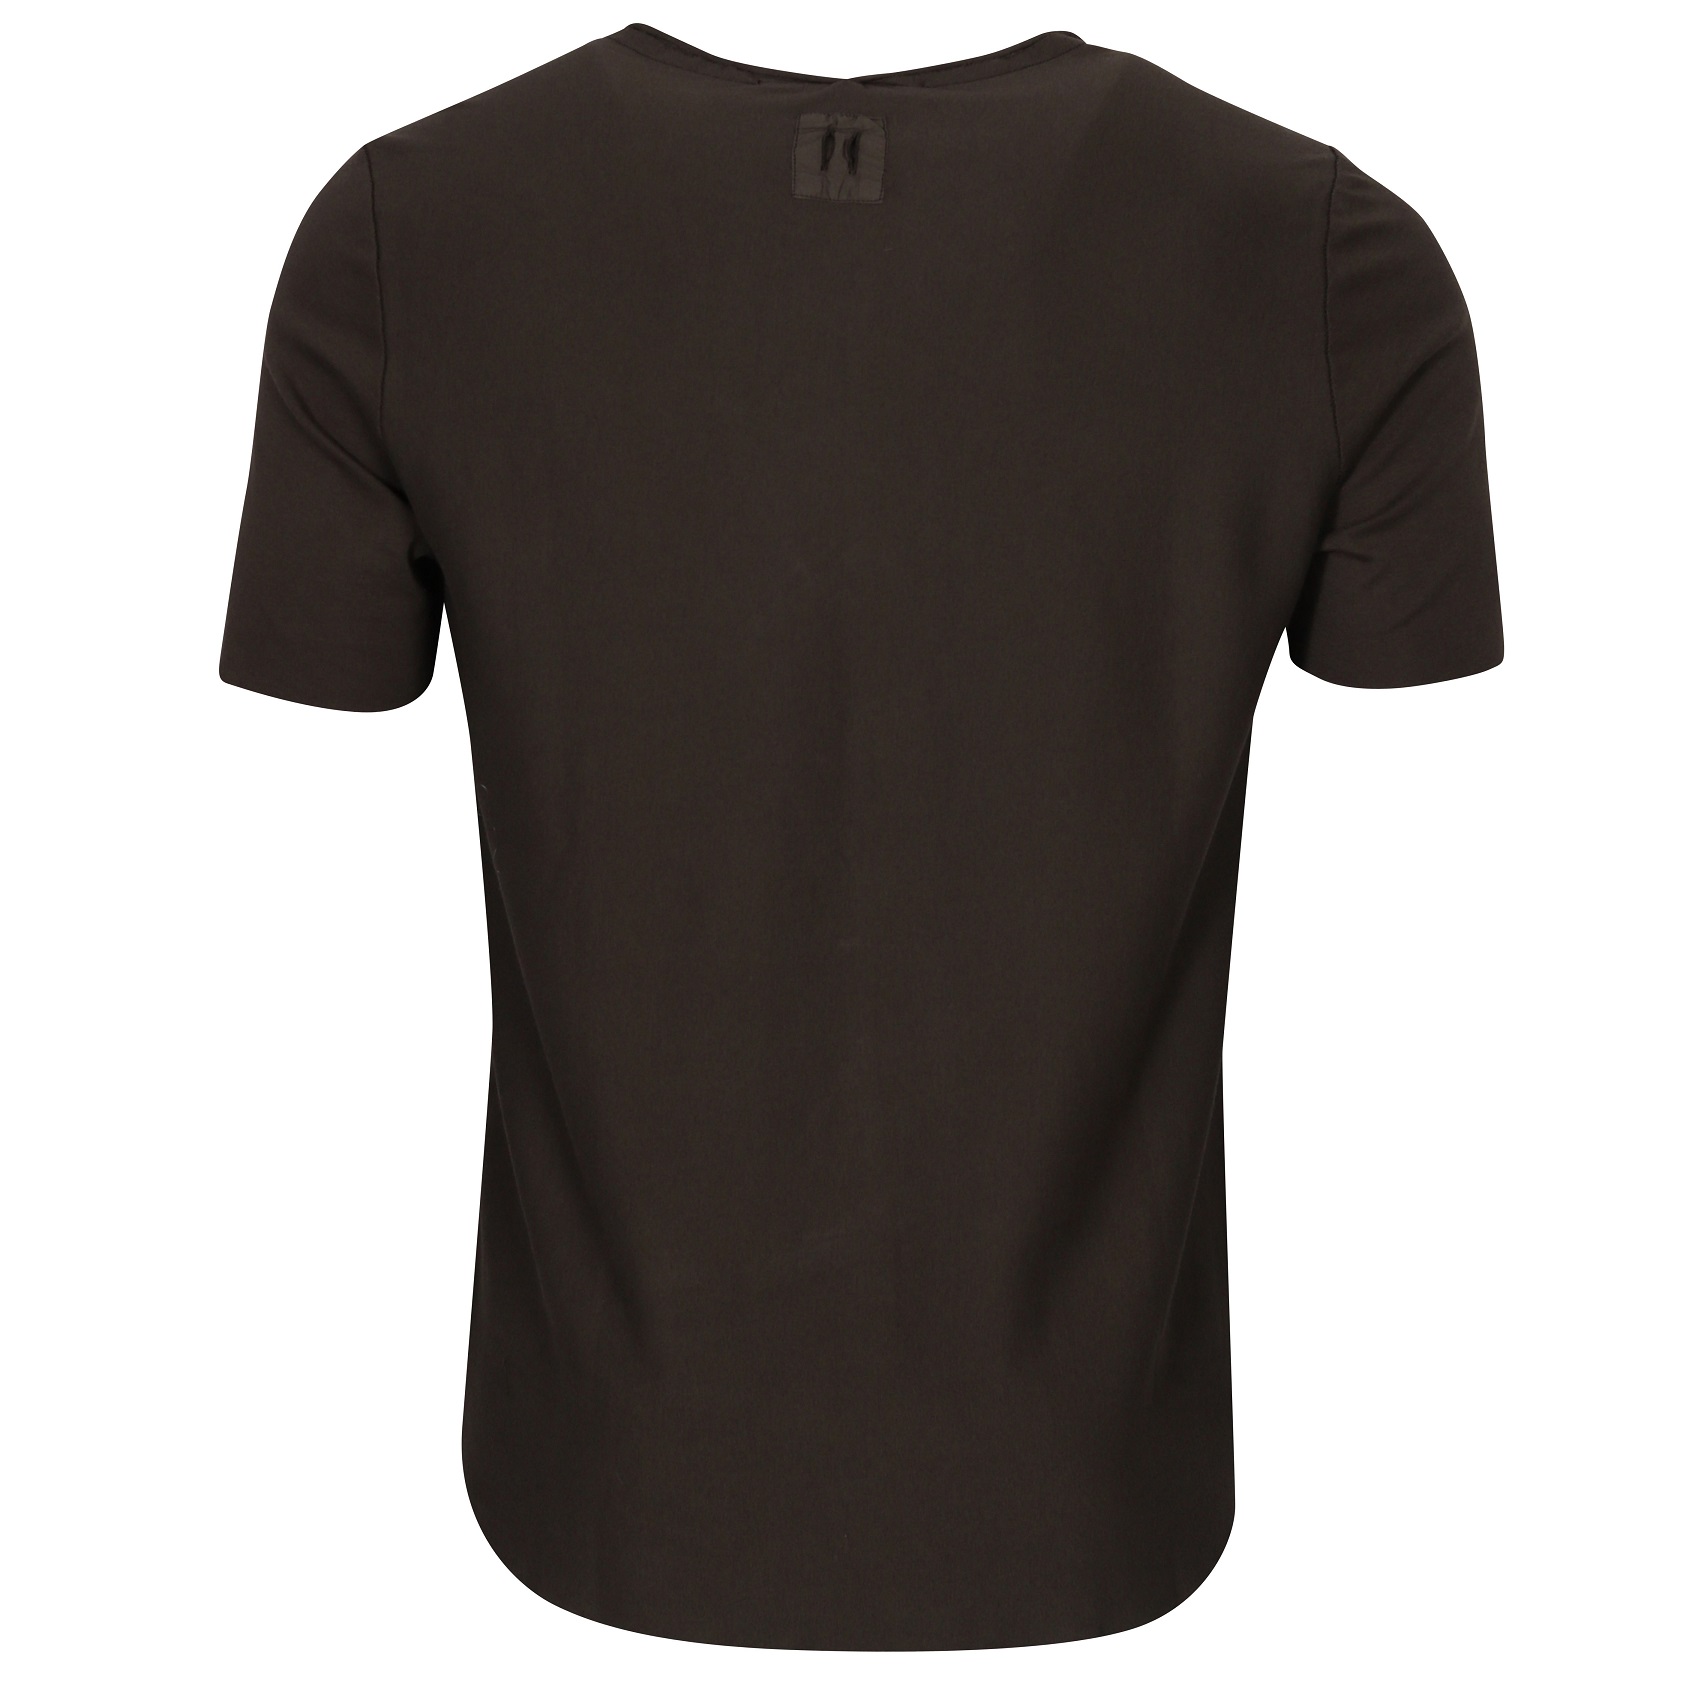 HANNES ROETHER T-Shirt in Dark Olive L